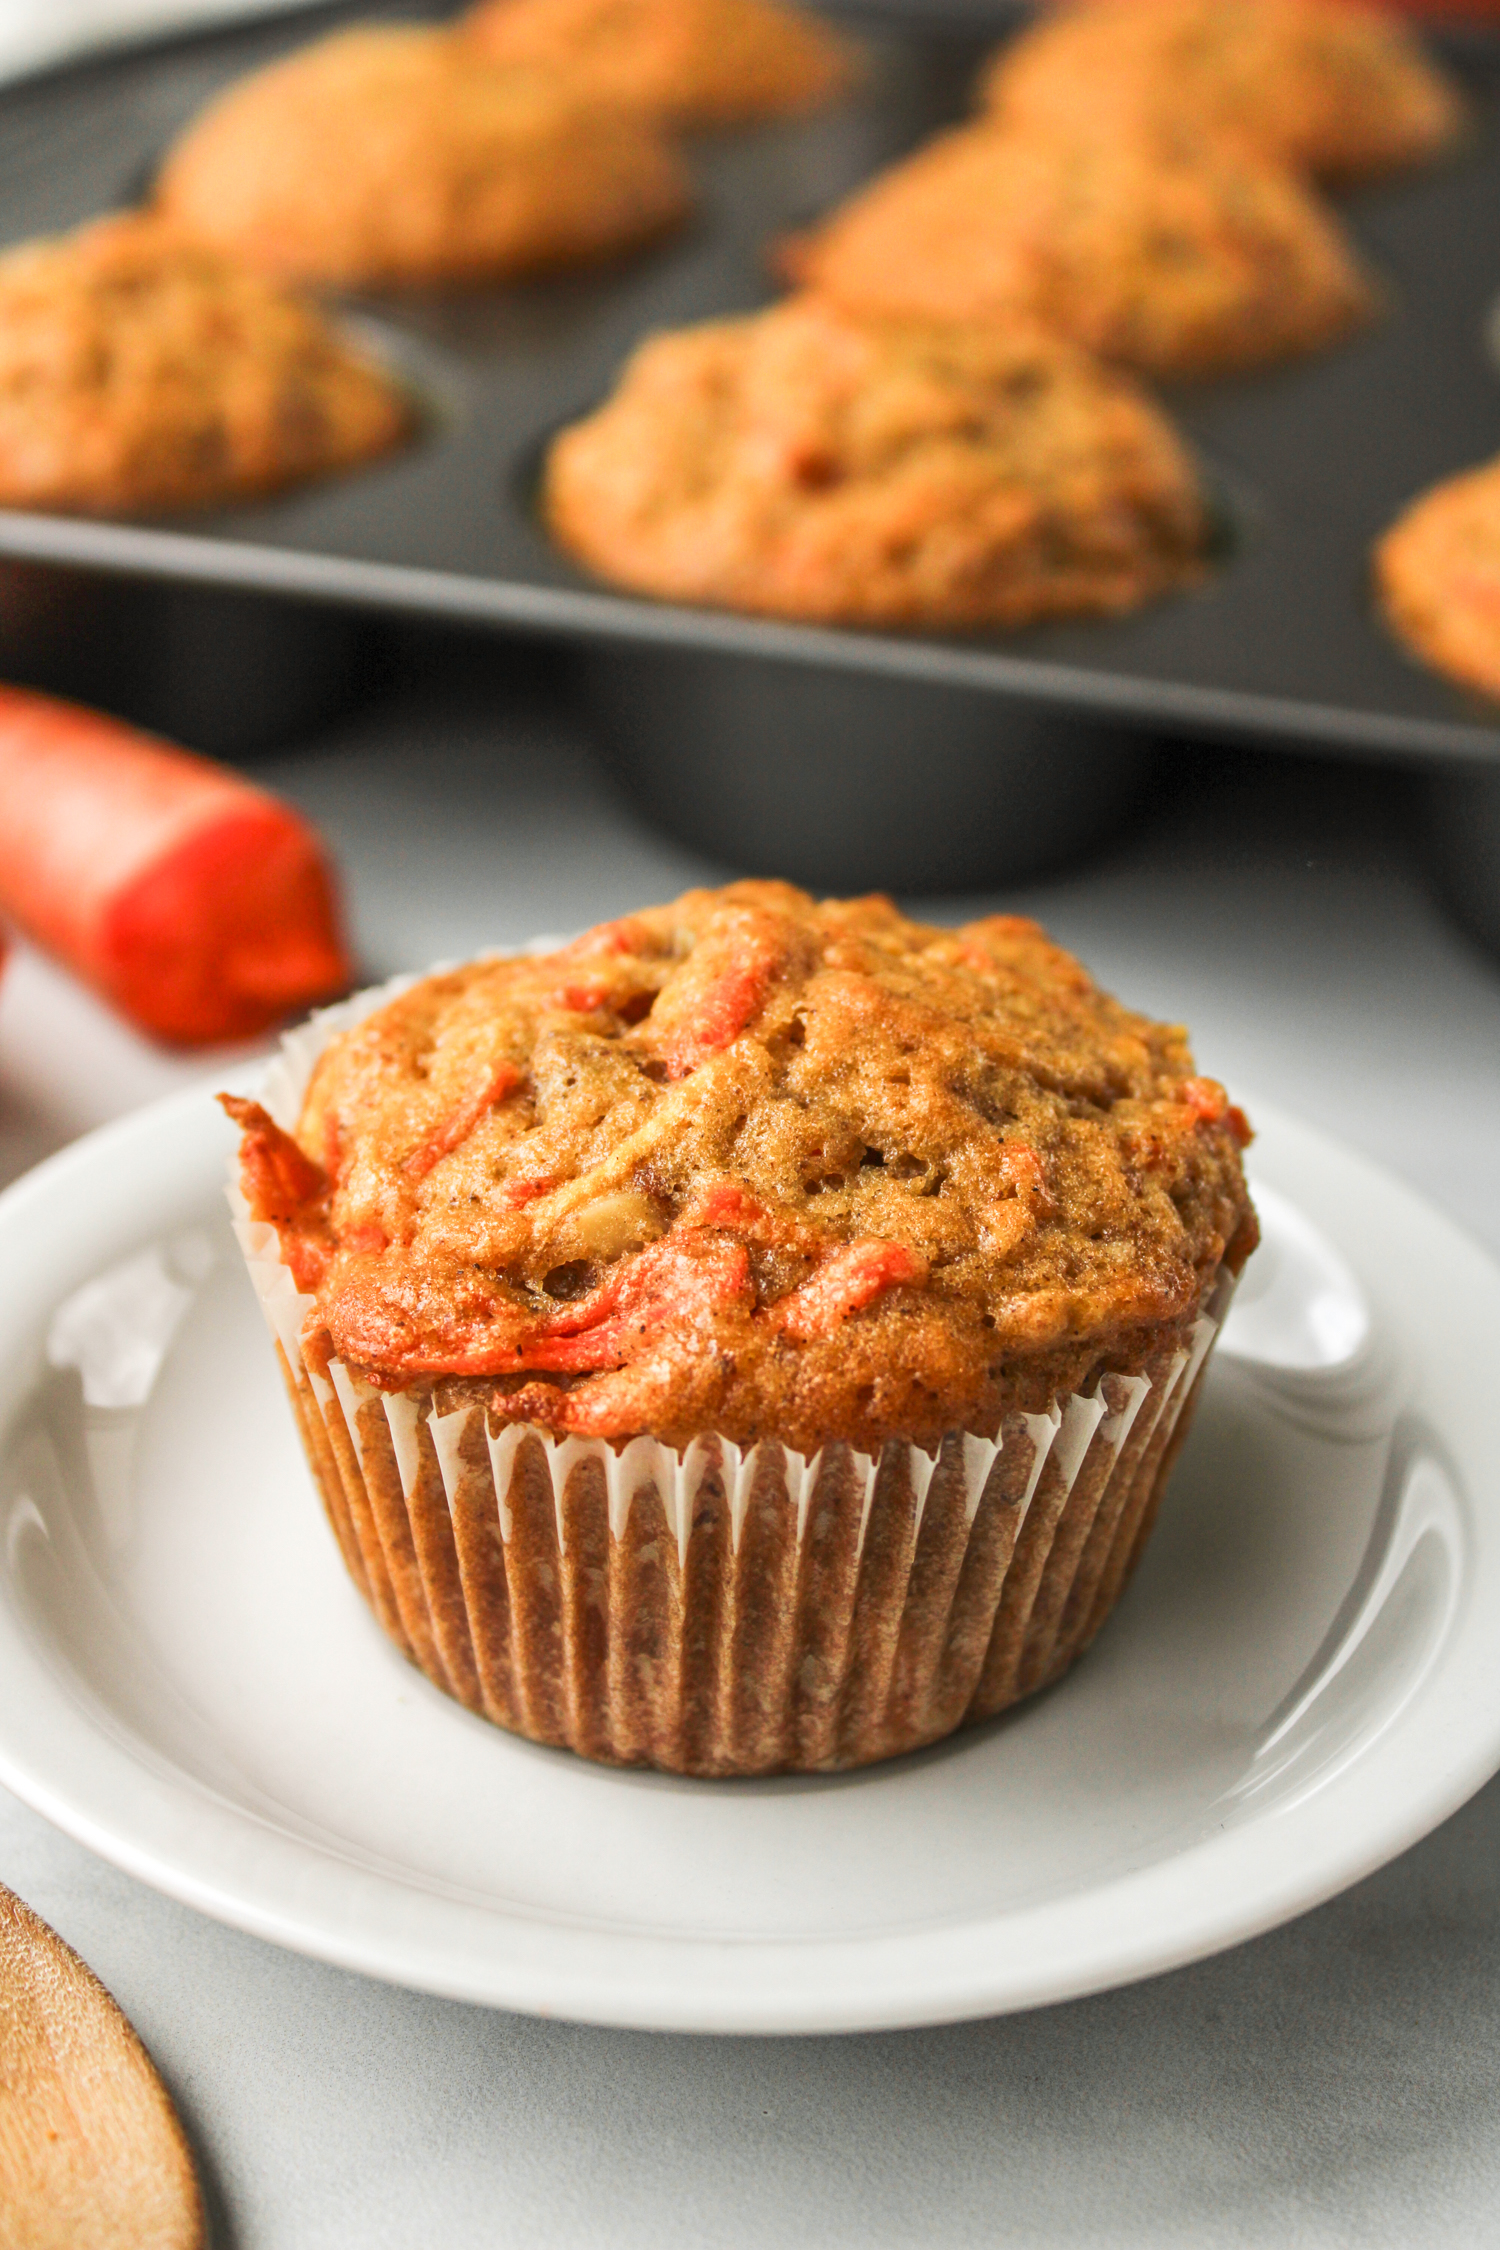 carrot apple muffin in a paper liner on a white ceramic plate